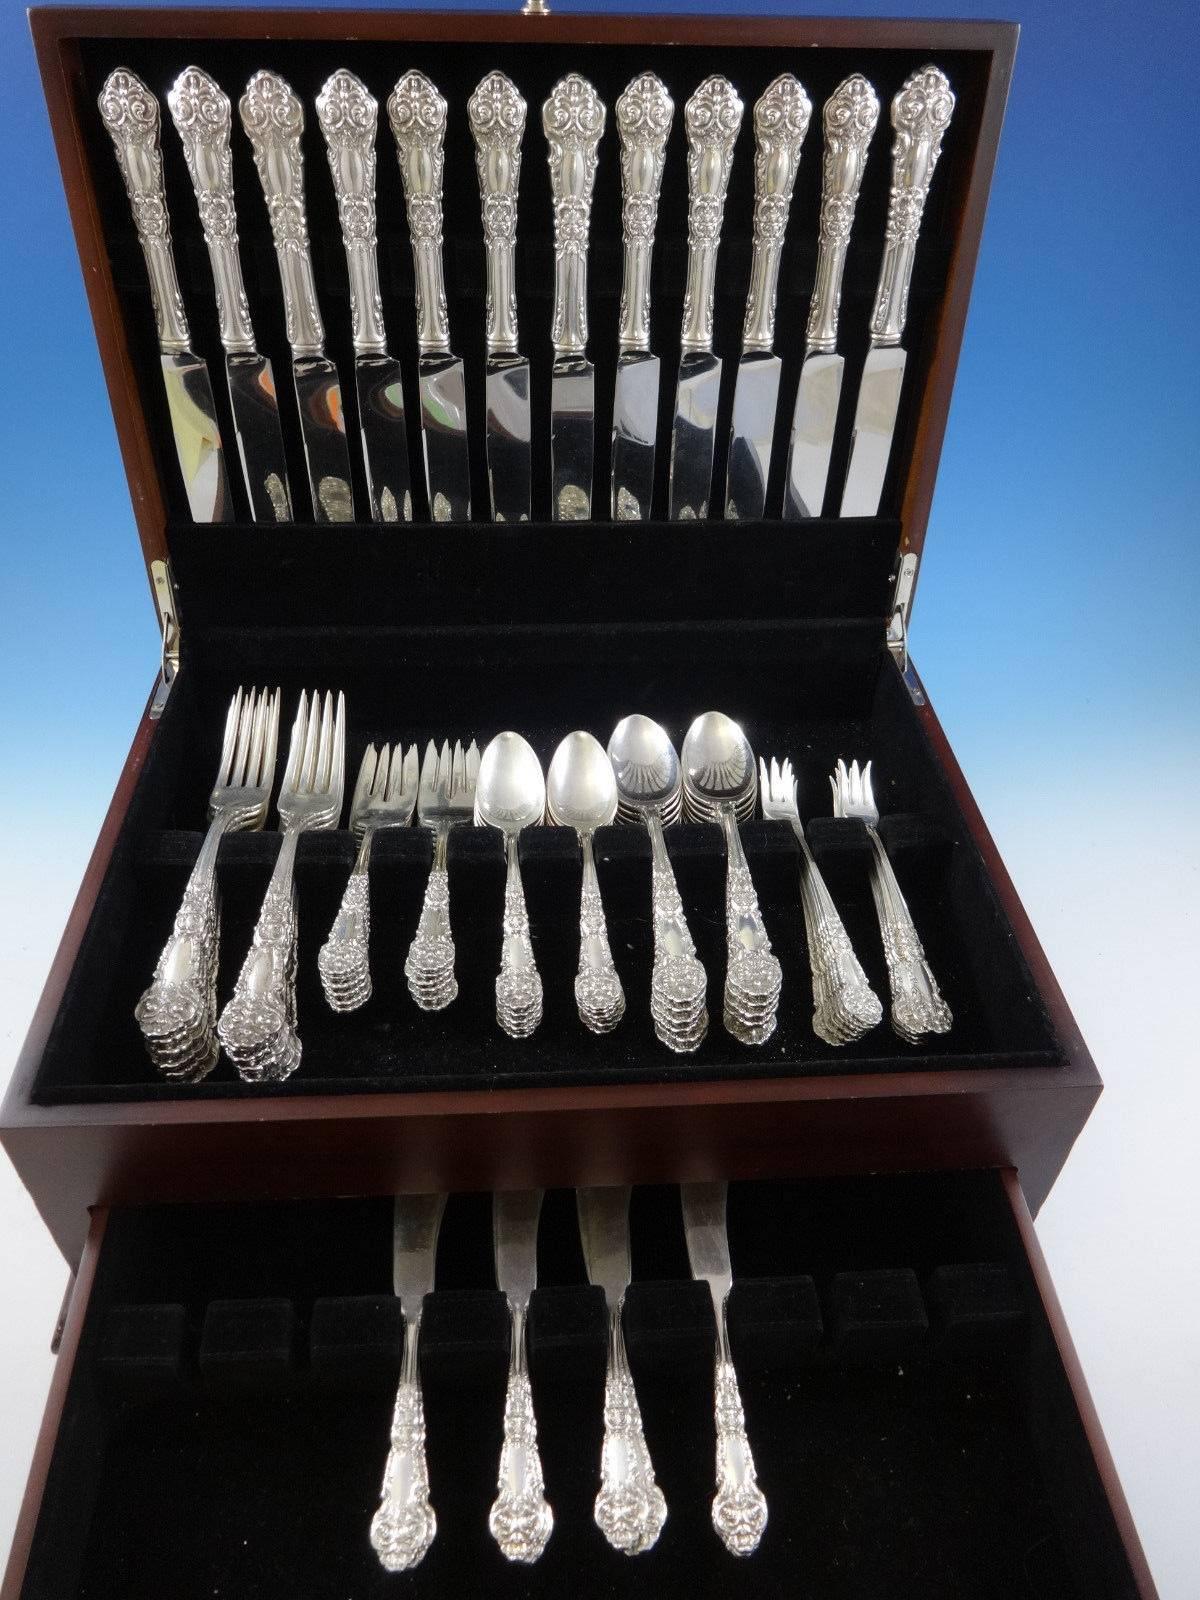 French Renaissance BY Reed & Barton sterling silver dinner size flatware set - 84 pieces. this set includes: 12 dinner size knives, 9 3/4